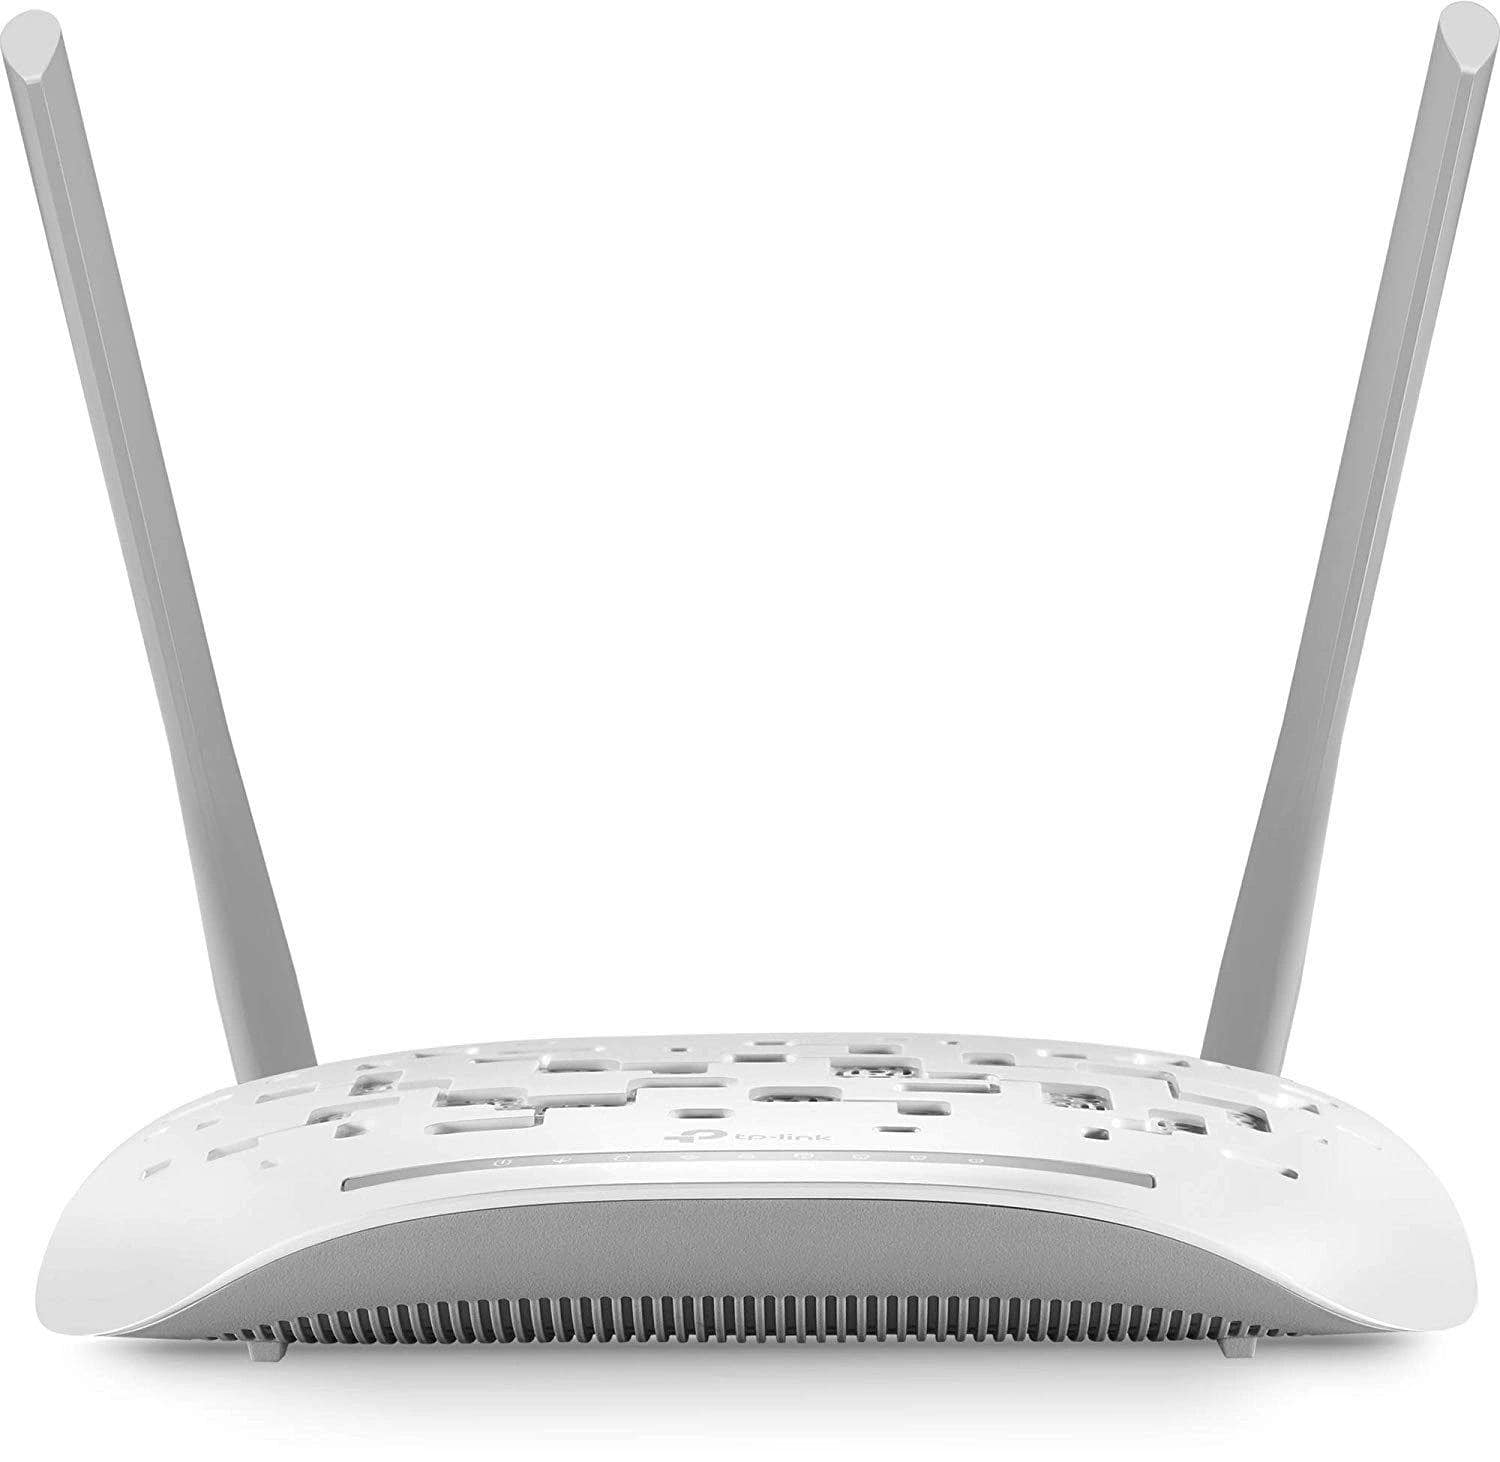 TP-LINK TL-WR840N 300MBPS WIRELESS N ROUTER WITH FIXED ANTENNA - Linkqage